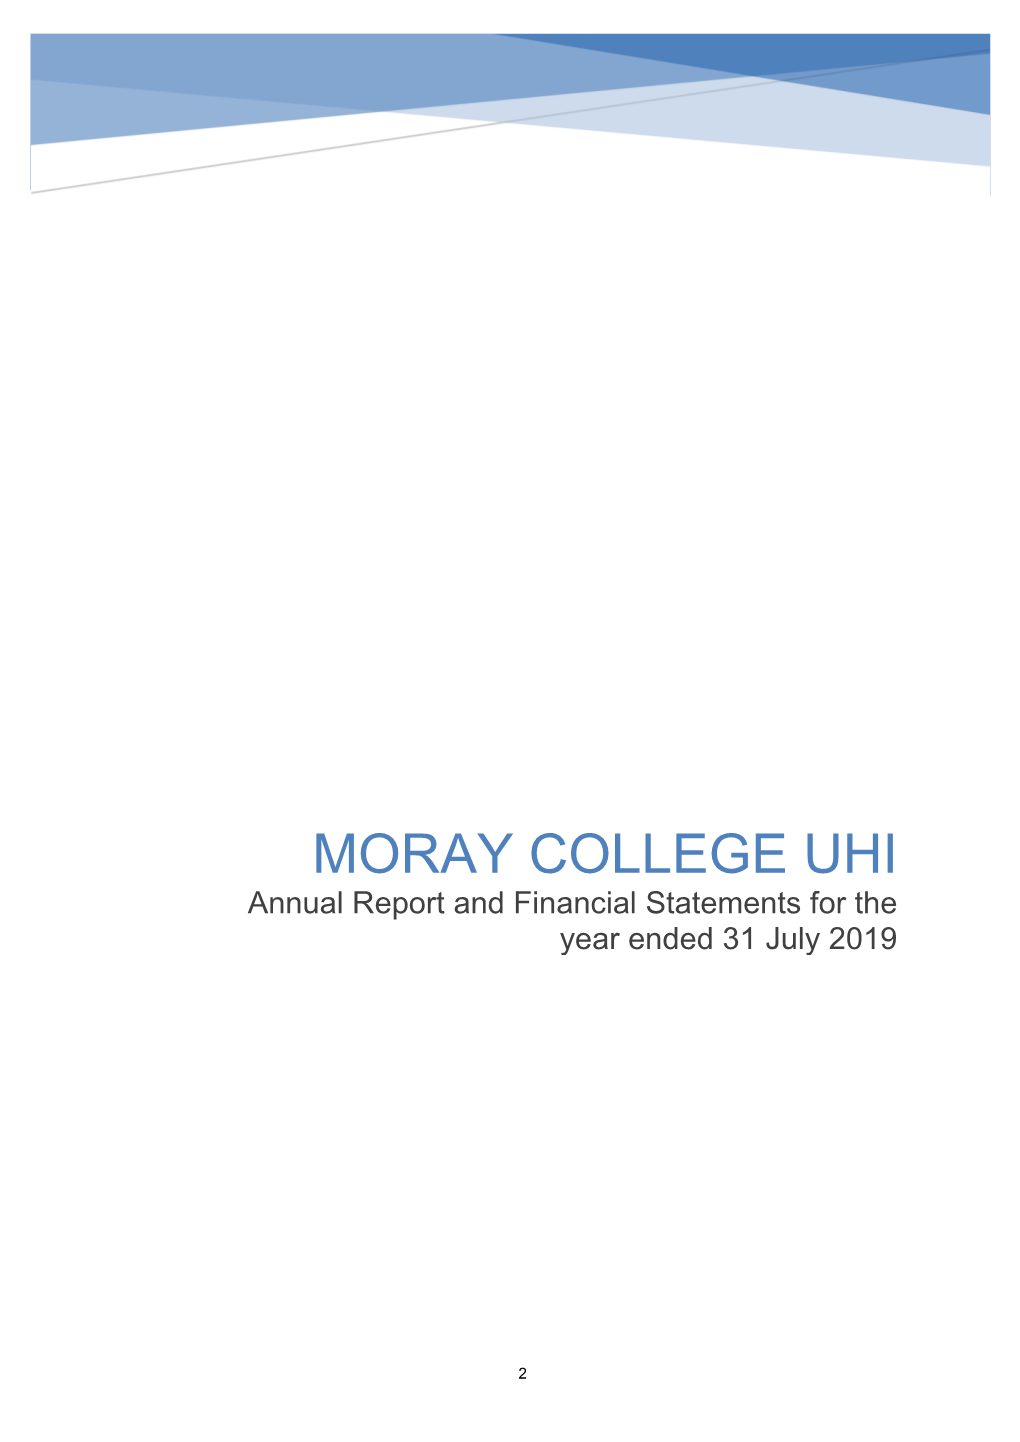 Moray College UHI Financial Statements for the Year Ended 31 July 2019